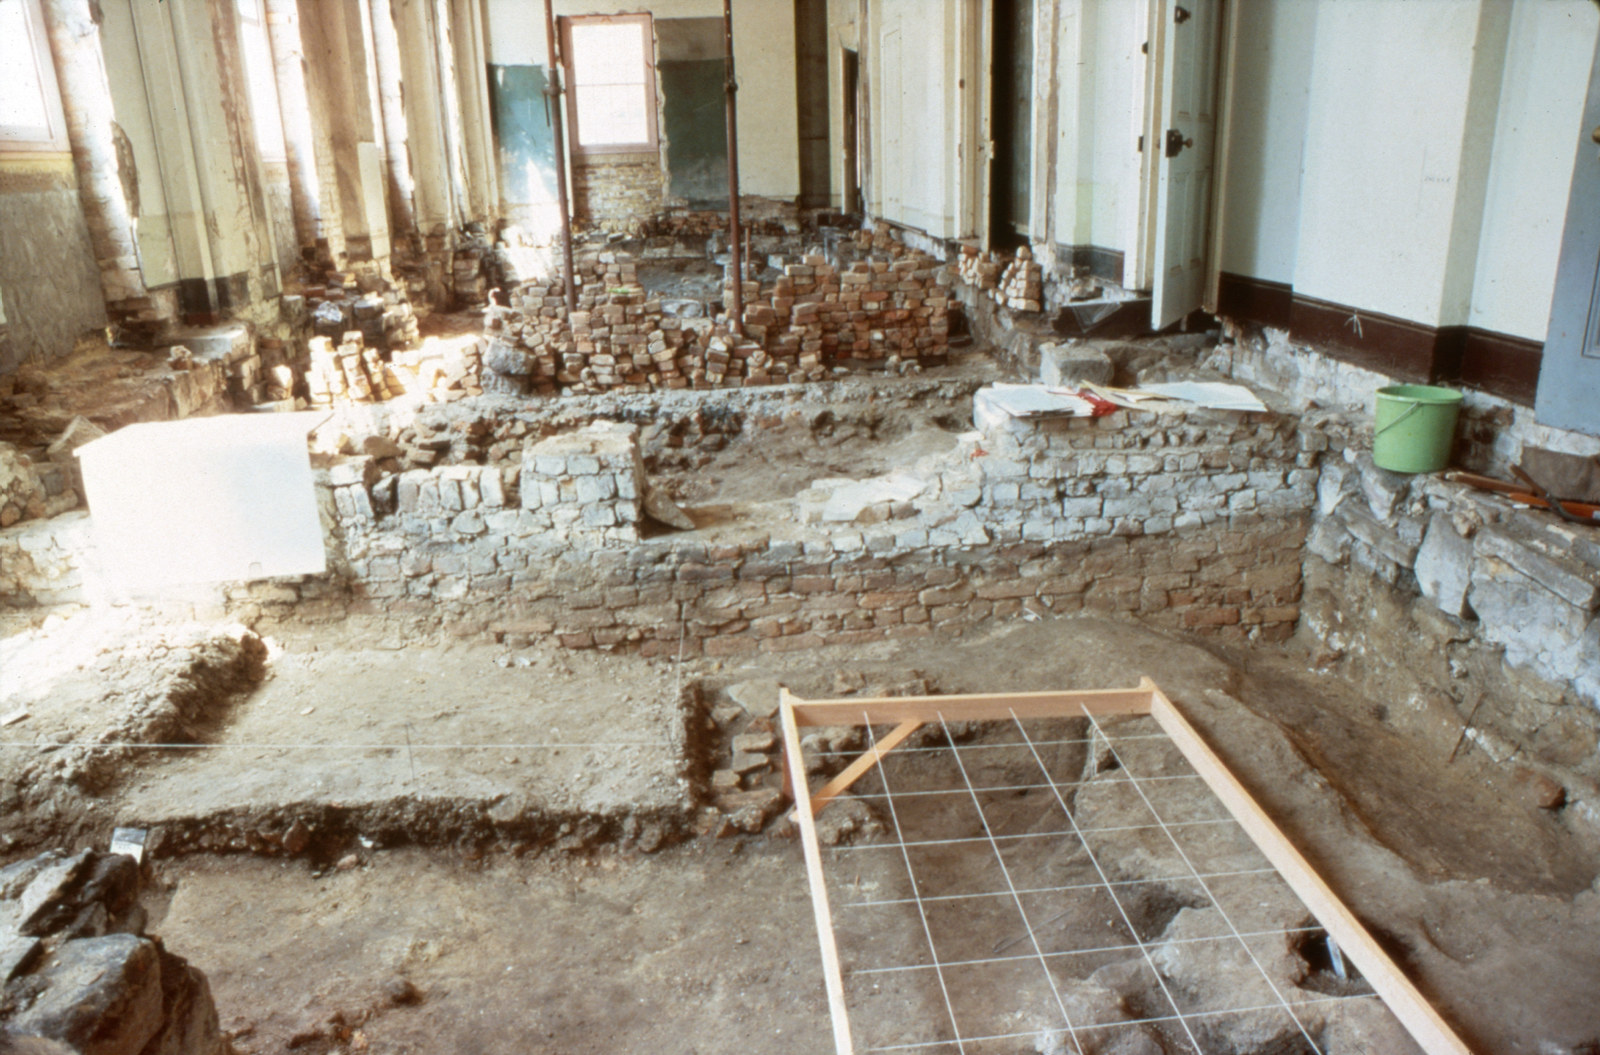 North-east ground floor room of Hyde Park Barracks during excavation, looking east, 1980-81. An archaeological grid is overlaid on a rat burrow in the foreground.